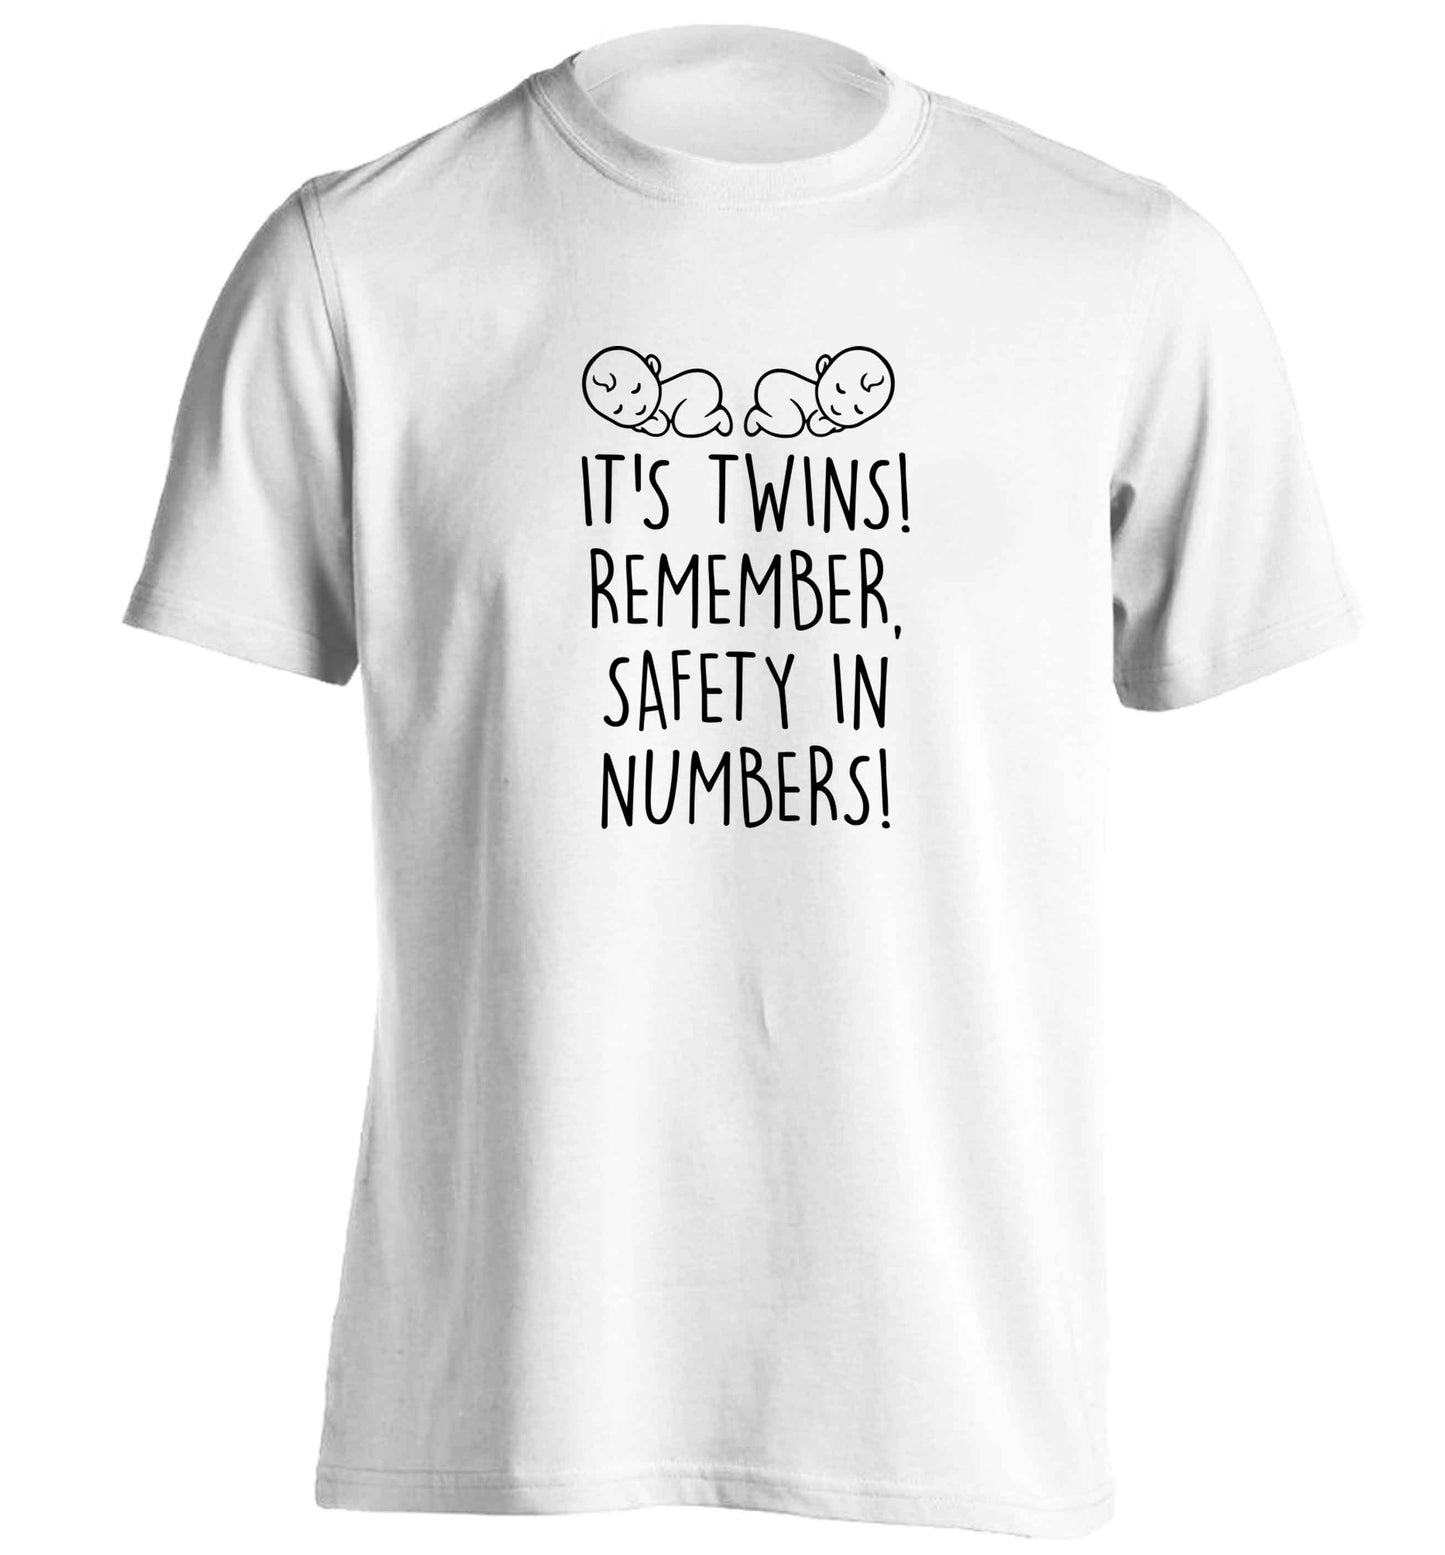 It's twins! Remember safety in numbers! adults unisex white Tshirt 2XL